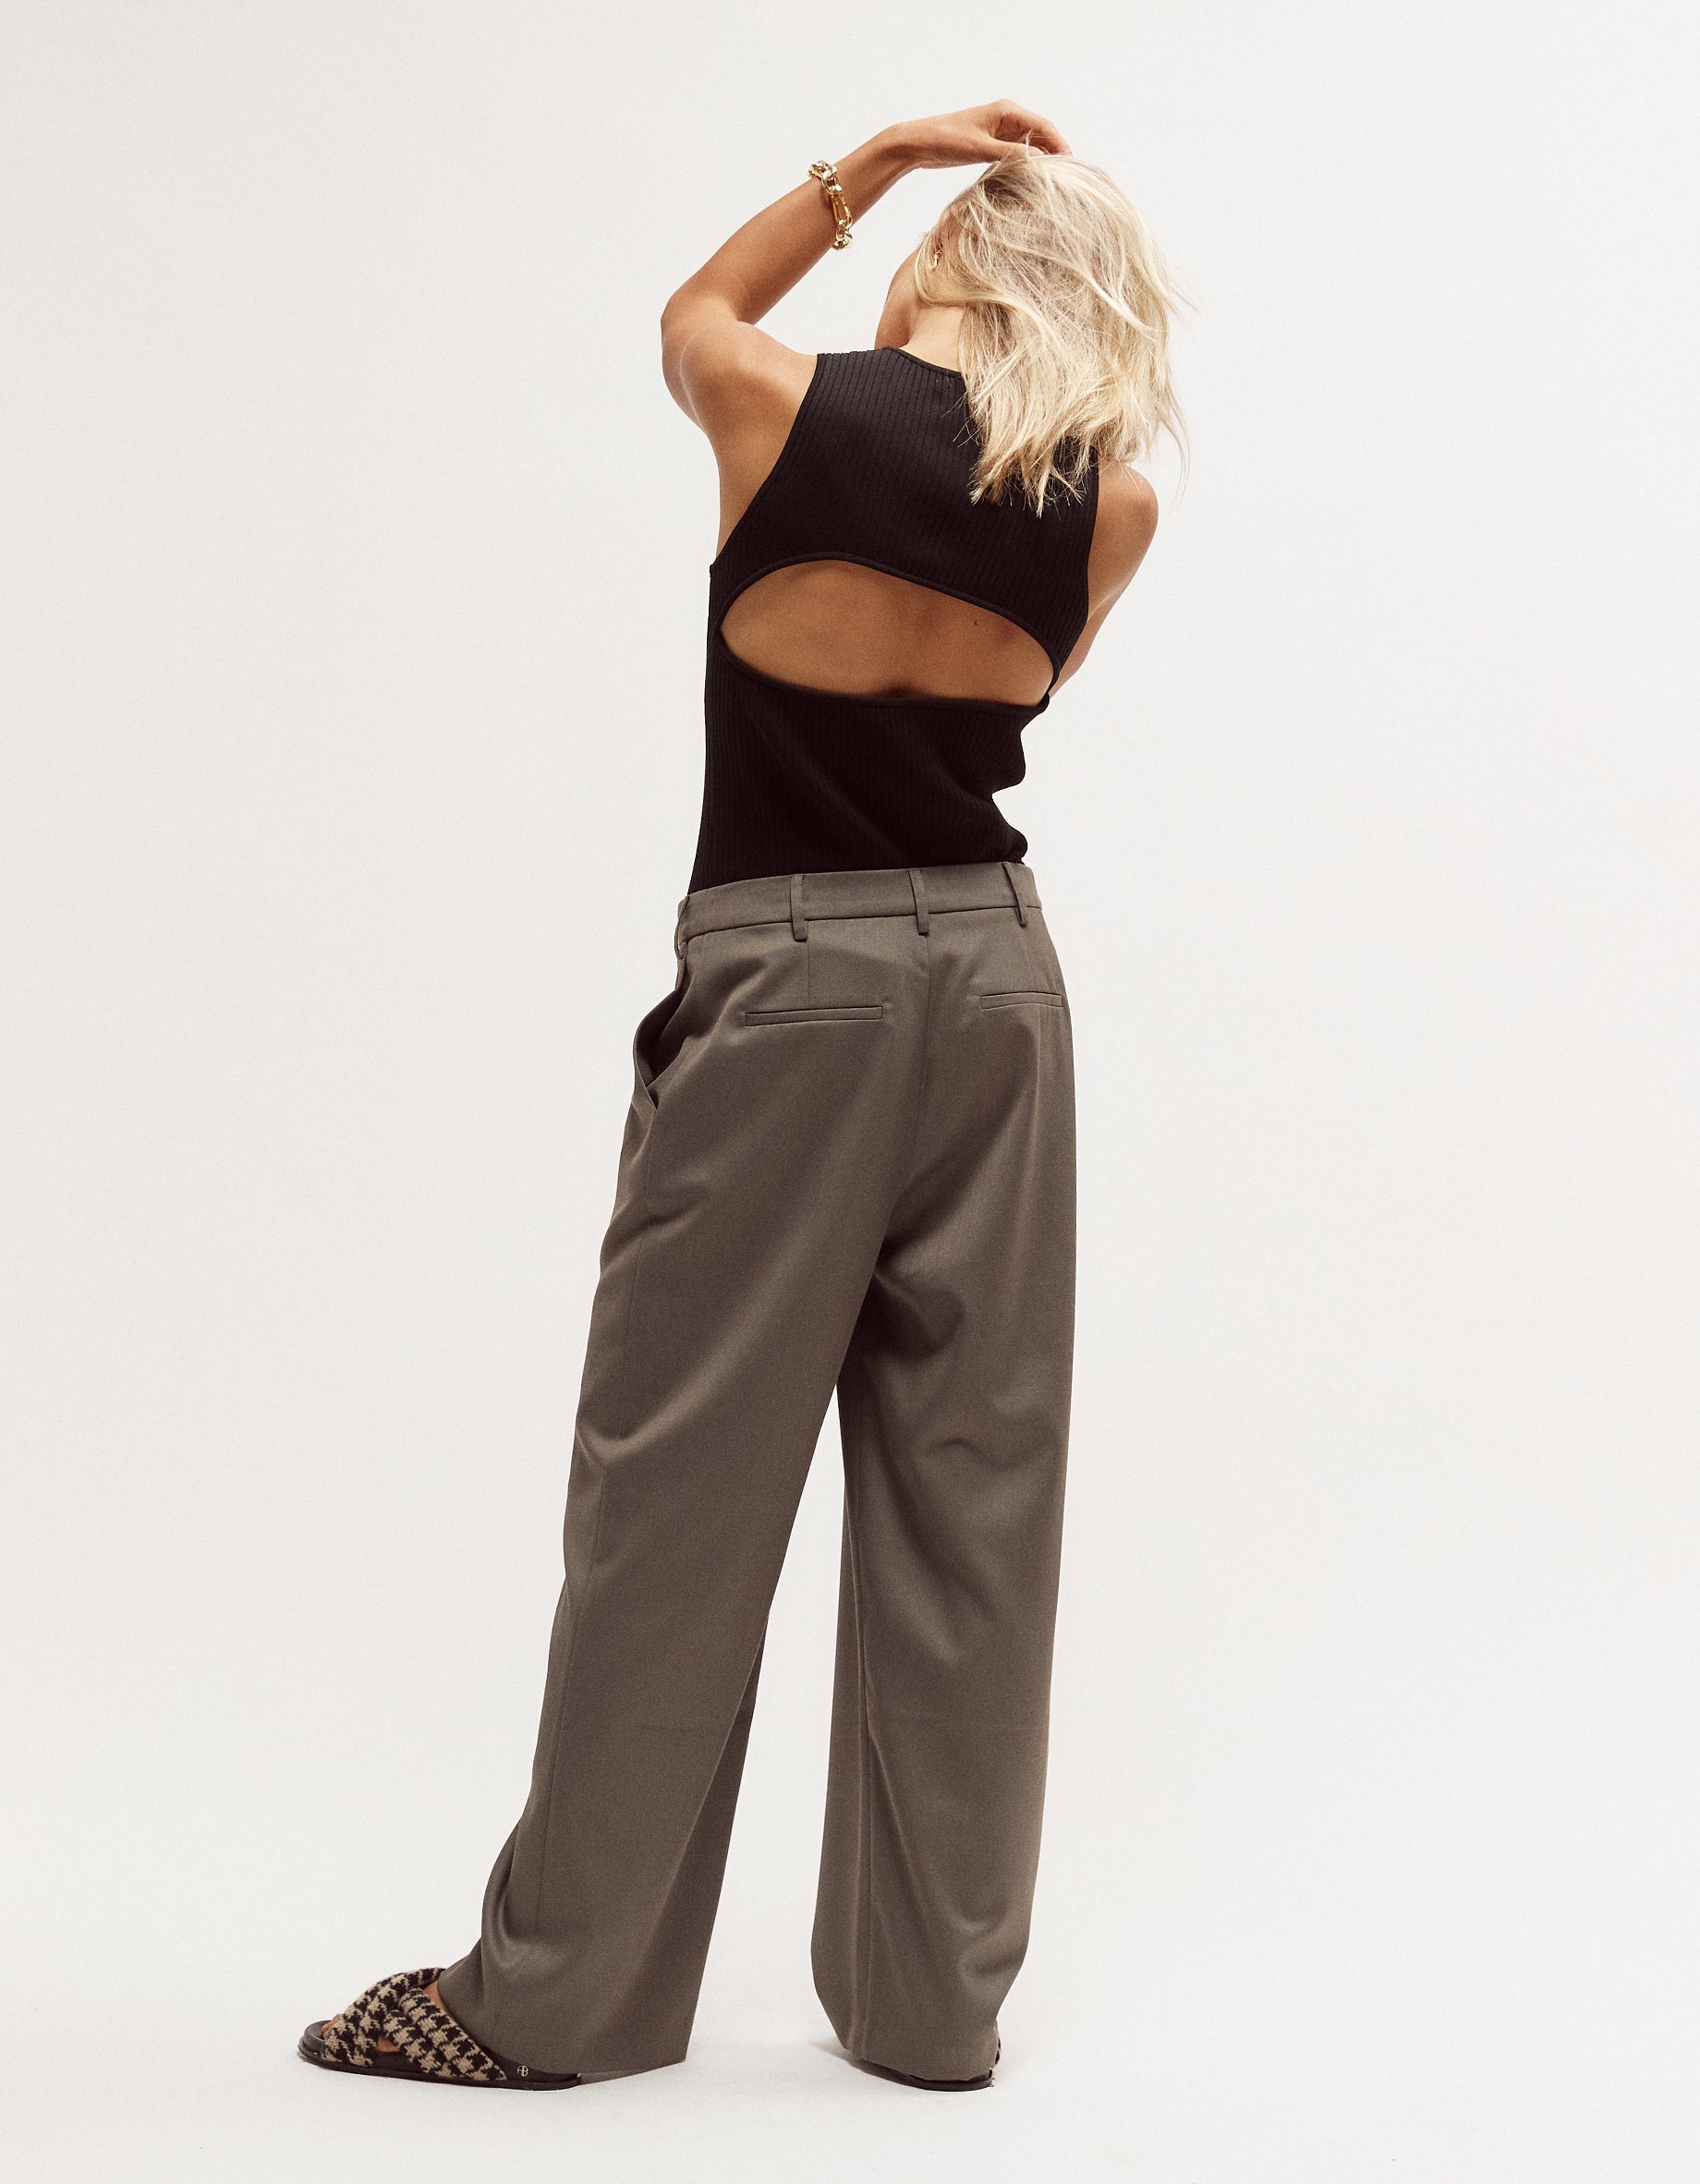 One Leg at a Time: H.P. Trousers - High Point Discovered